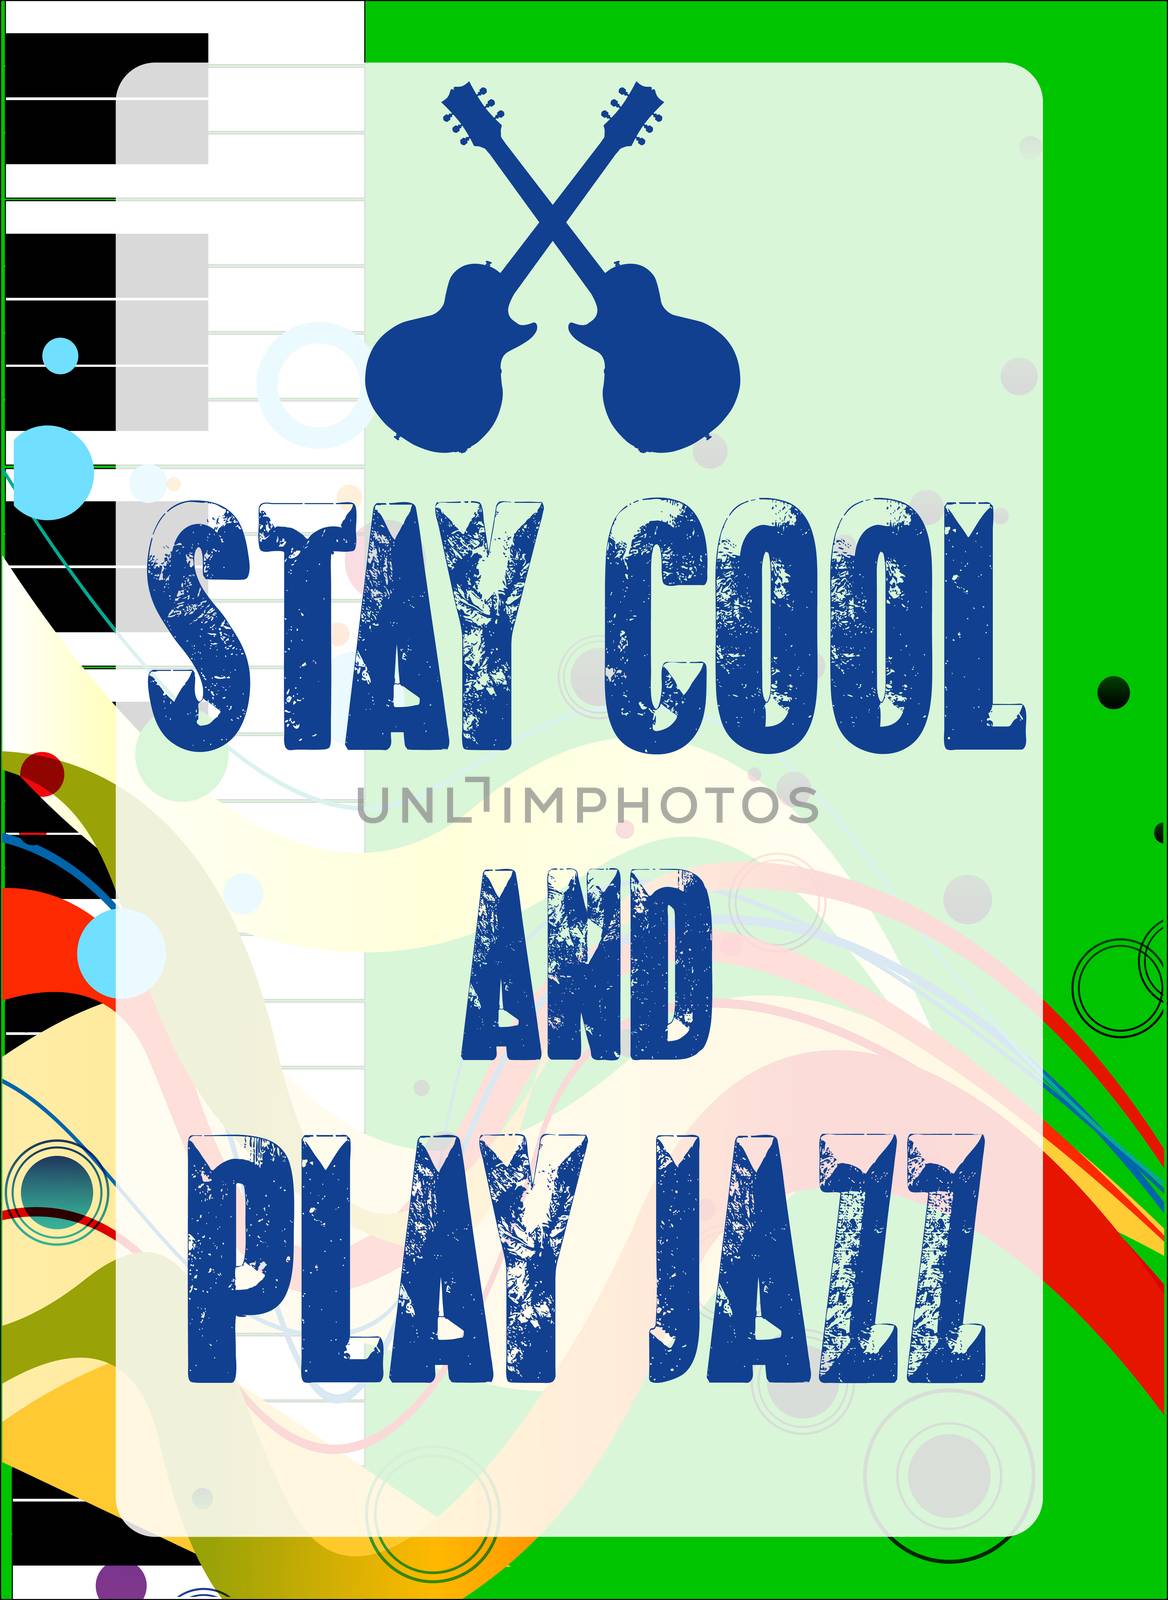 Black and white piano keys set on a jazz grunge background with the message Stay Cool and Play Jazz